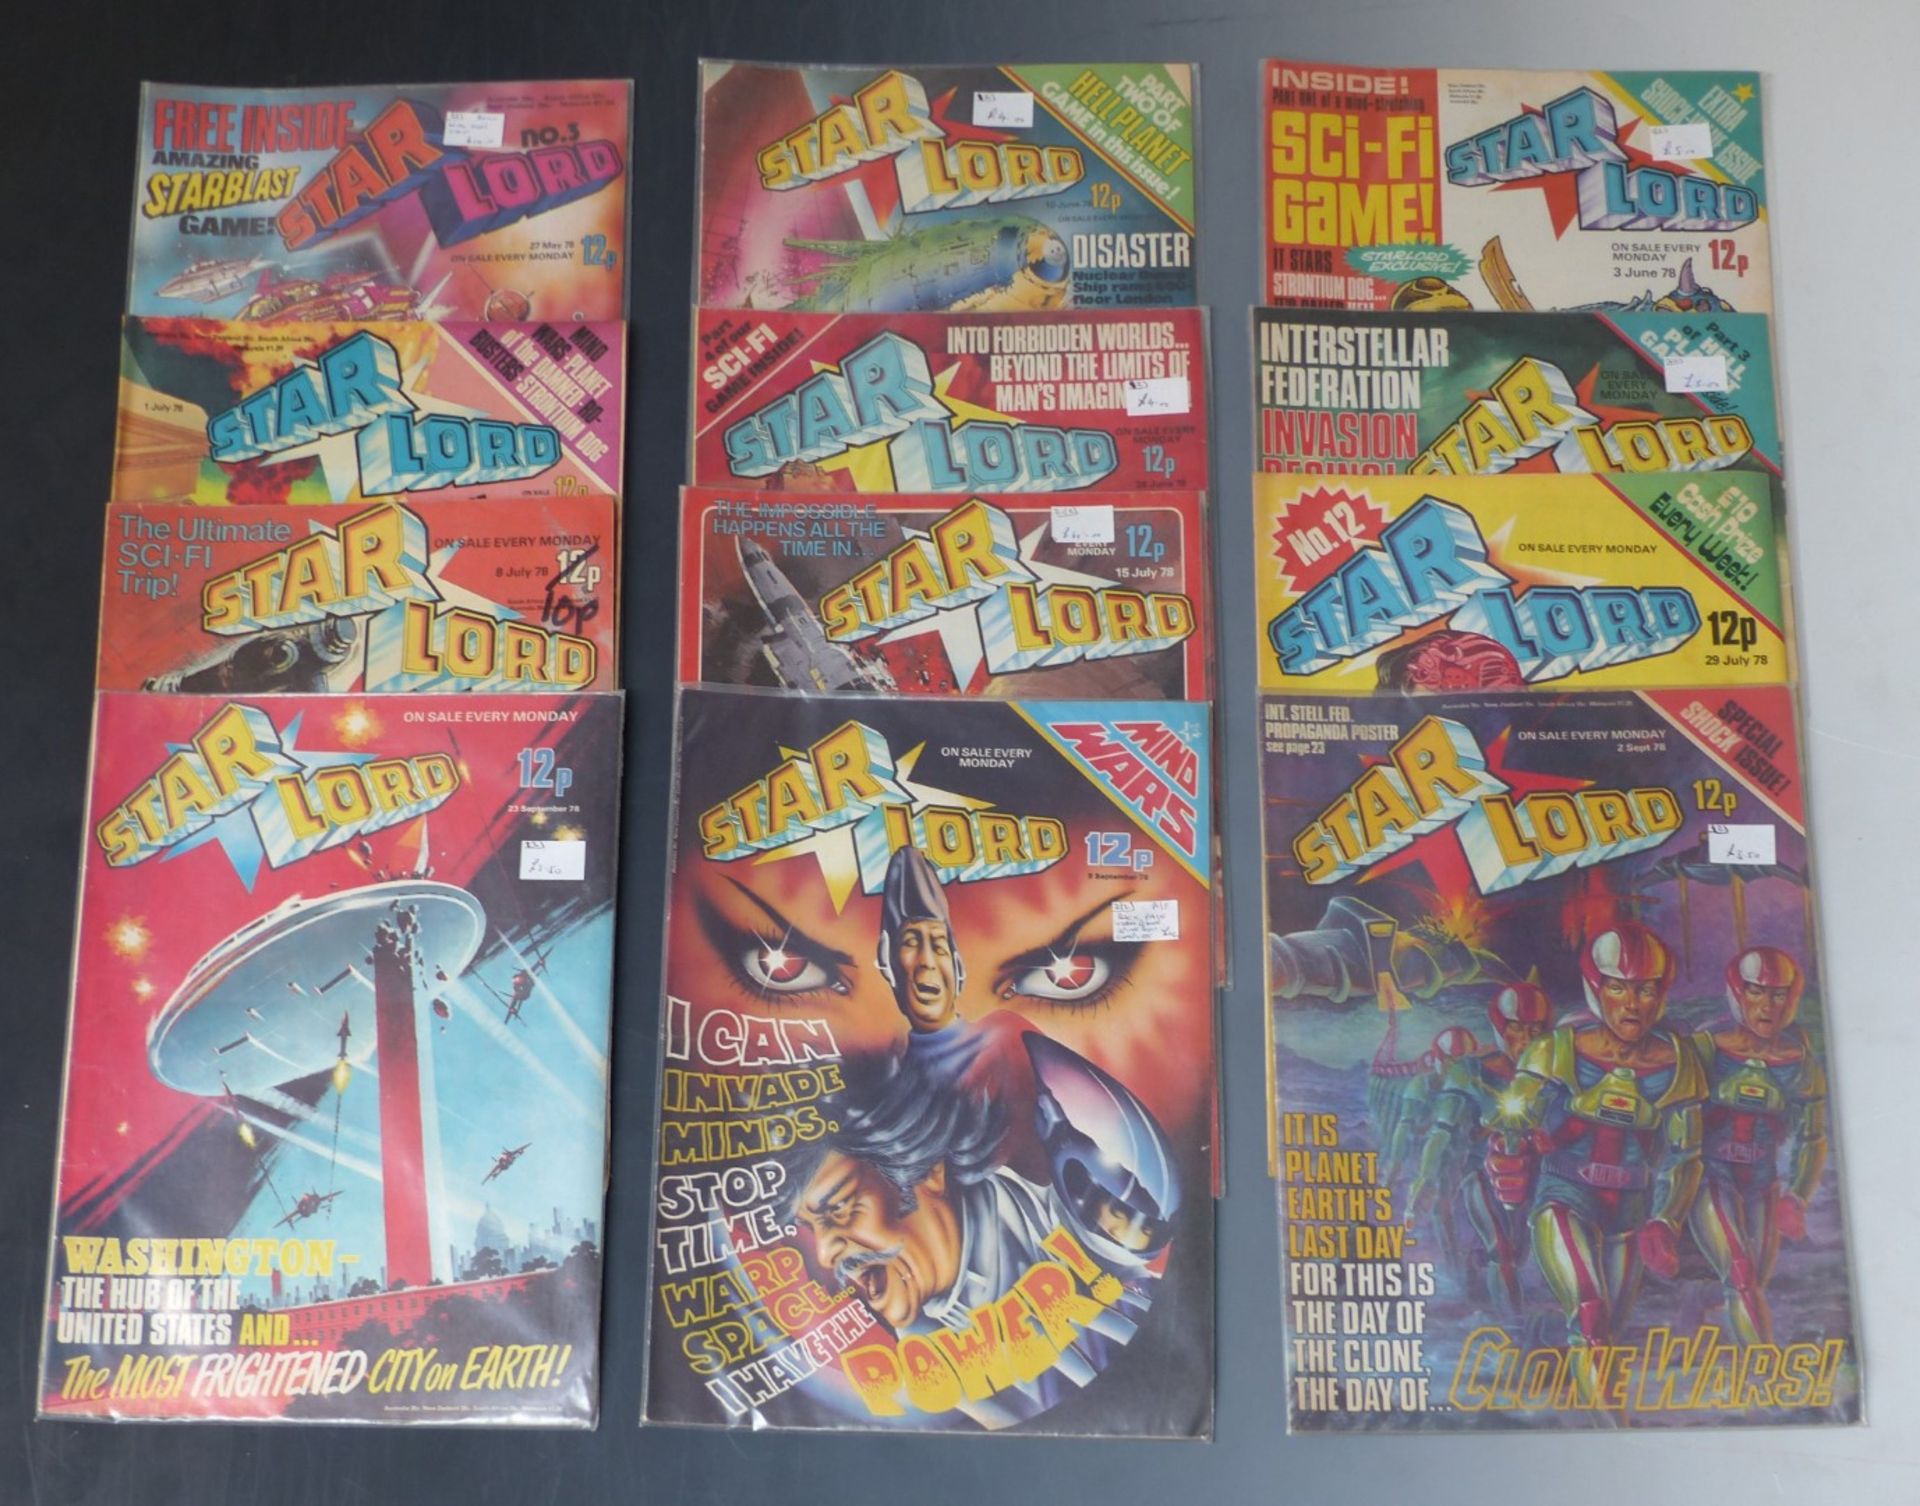 Twelve Star Lord comics dating from 1978, one with free gift. - Image 2 of 2